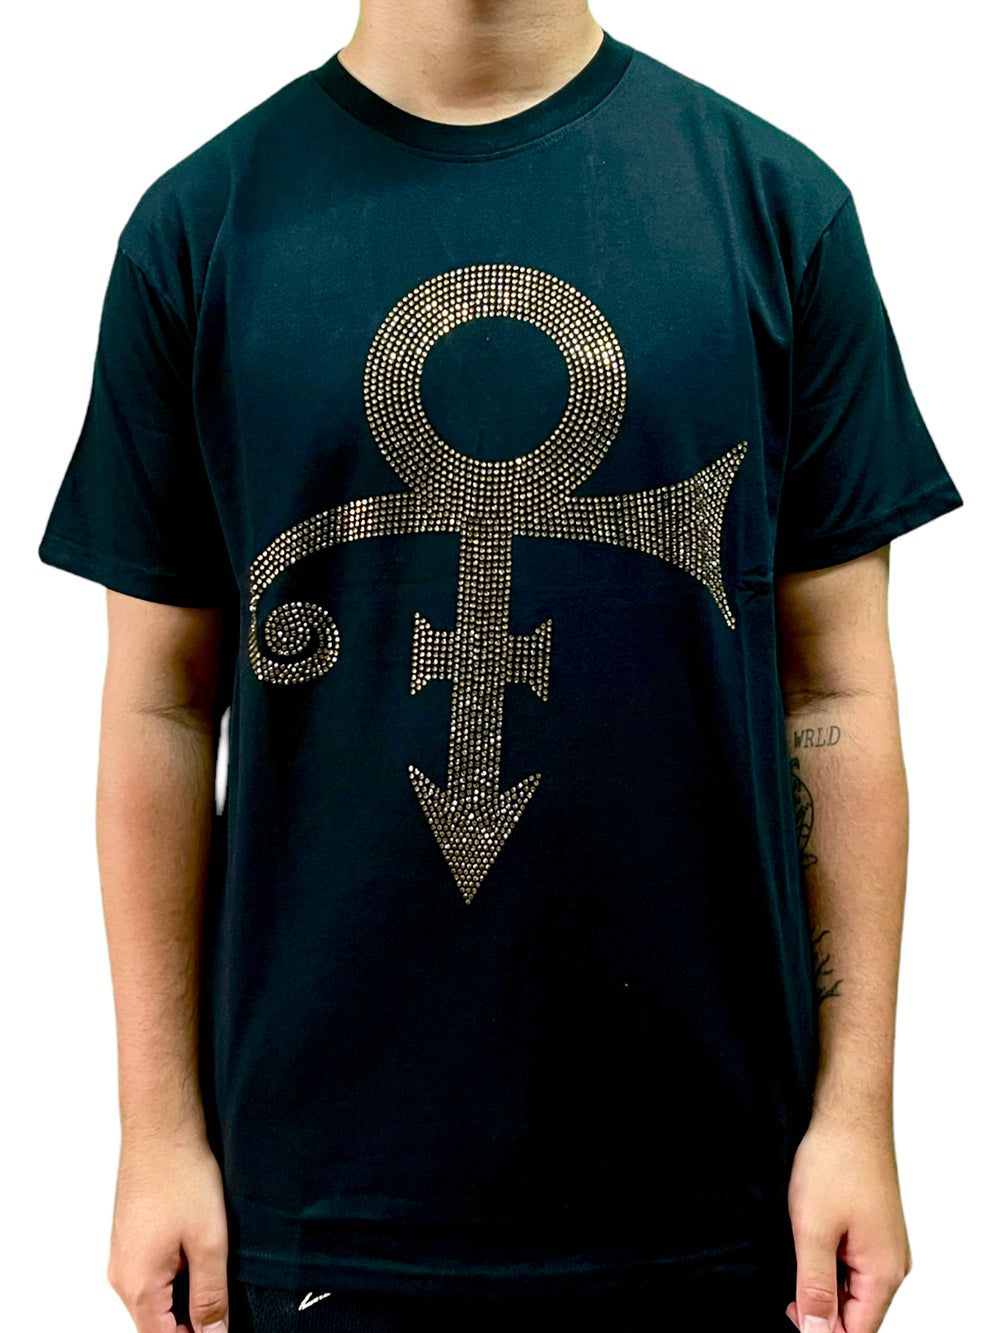 Prince – The Gold Experience Love Symbol Diamante Official Unisex T-Shirt Various Sizes NEW